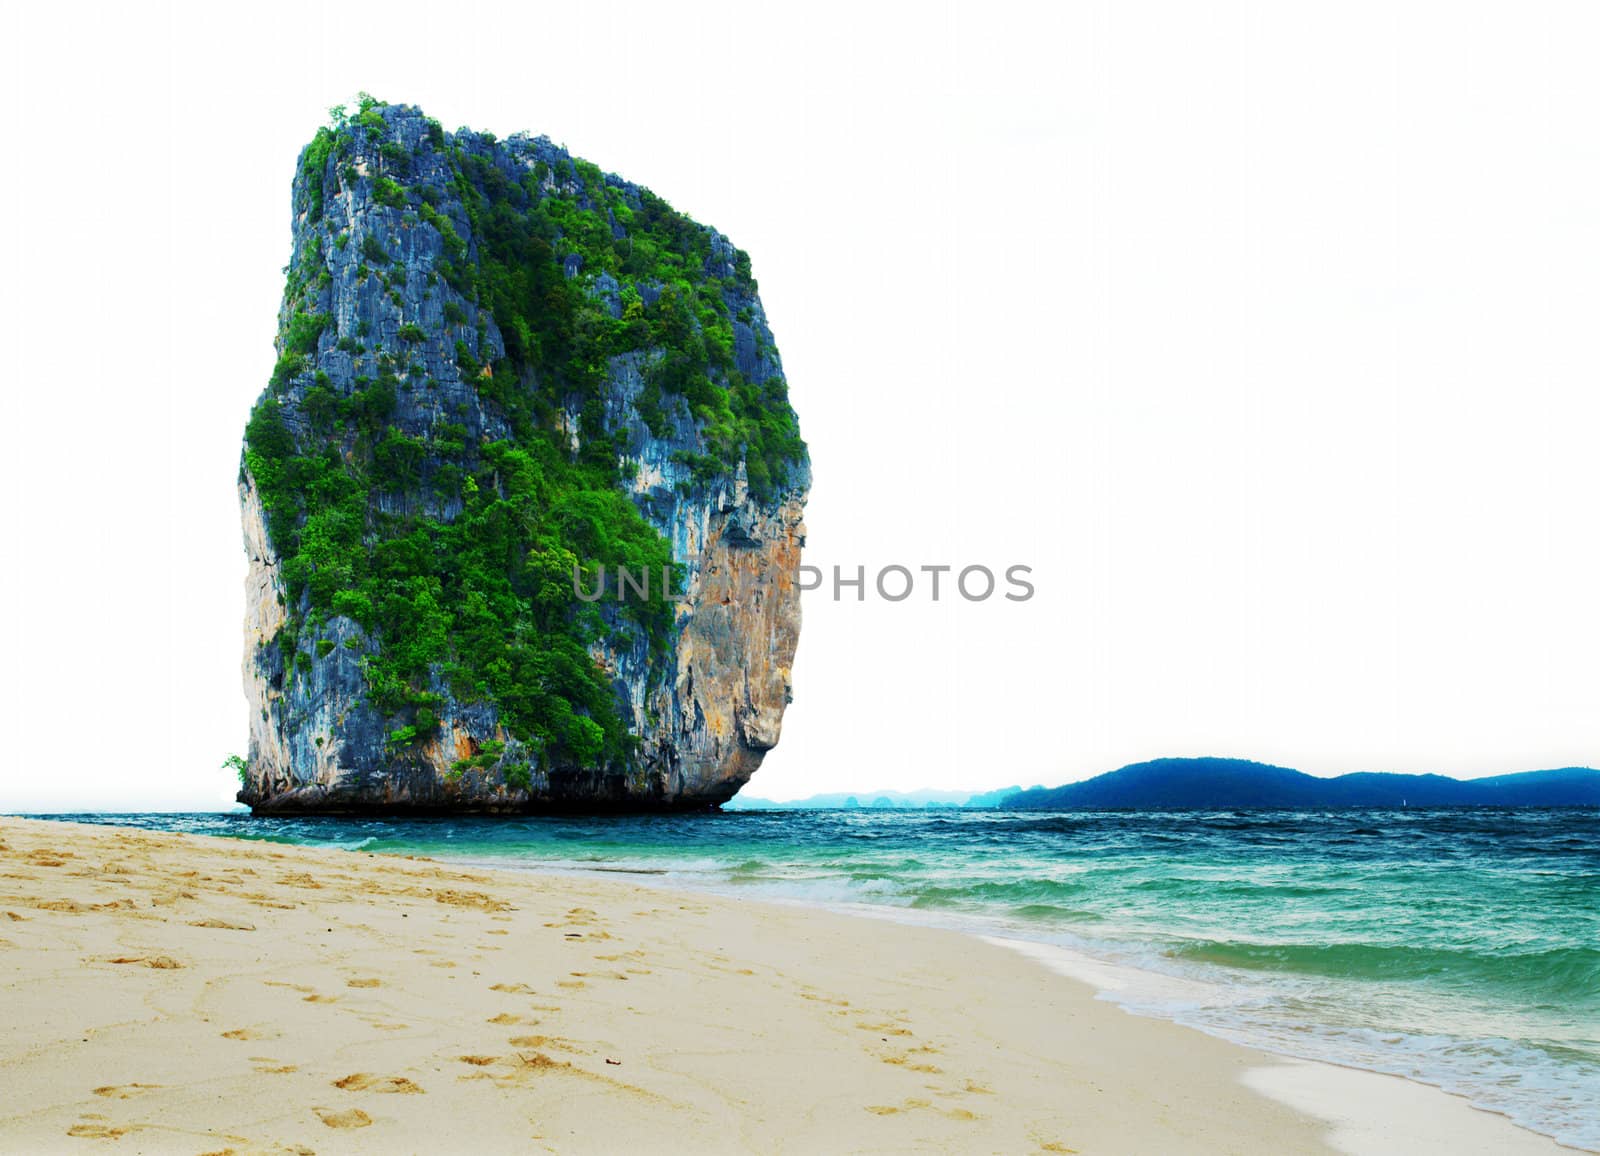 High cliff on Poda island. Exotic tropical landscape.